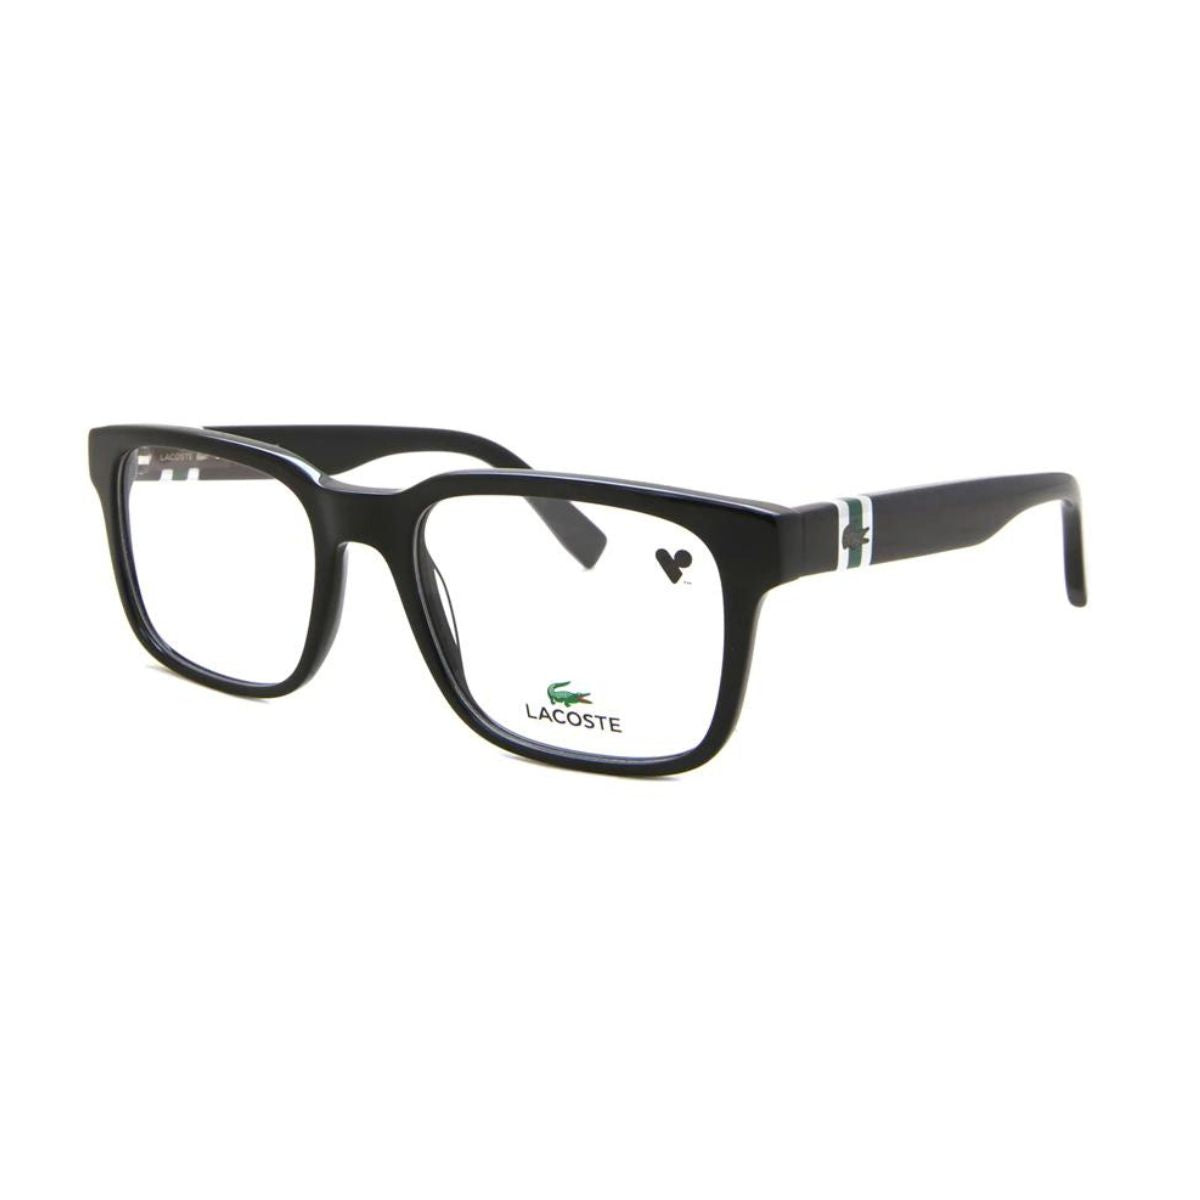 "stylish Lacoste 2905 001 spectacle frame for men and women at optorium"